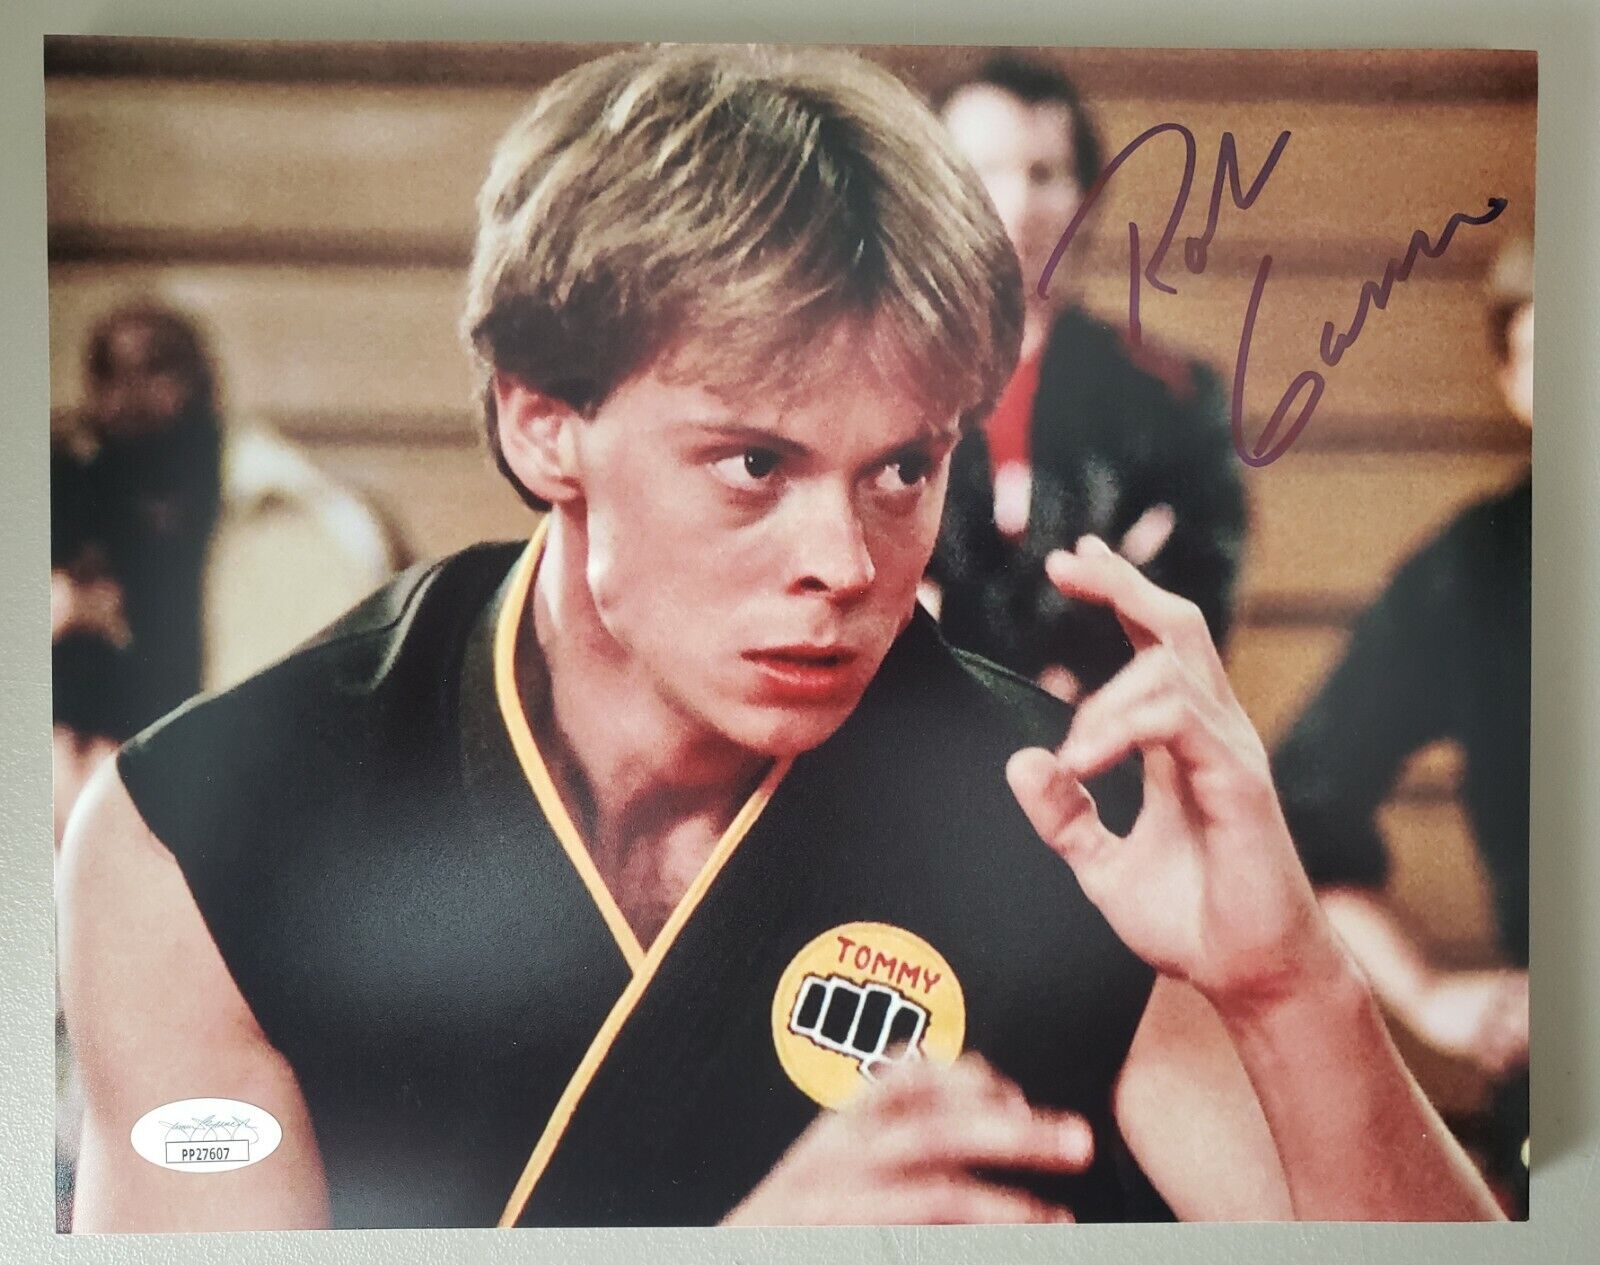 8X10 Autographed by Rob Garrison in The Karate Kid. JSA